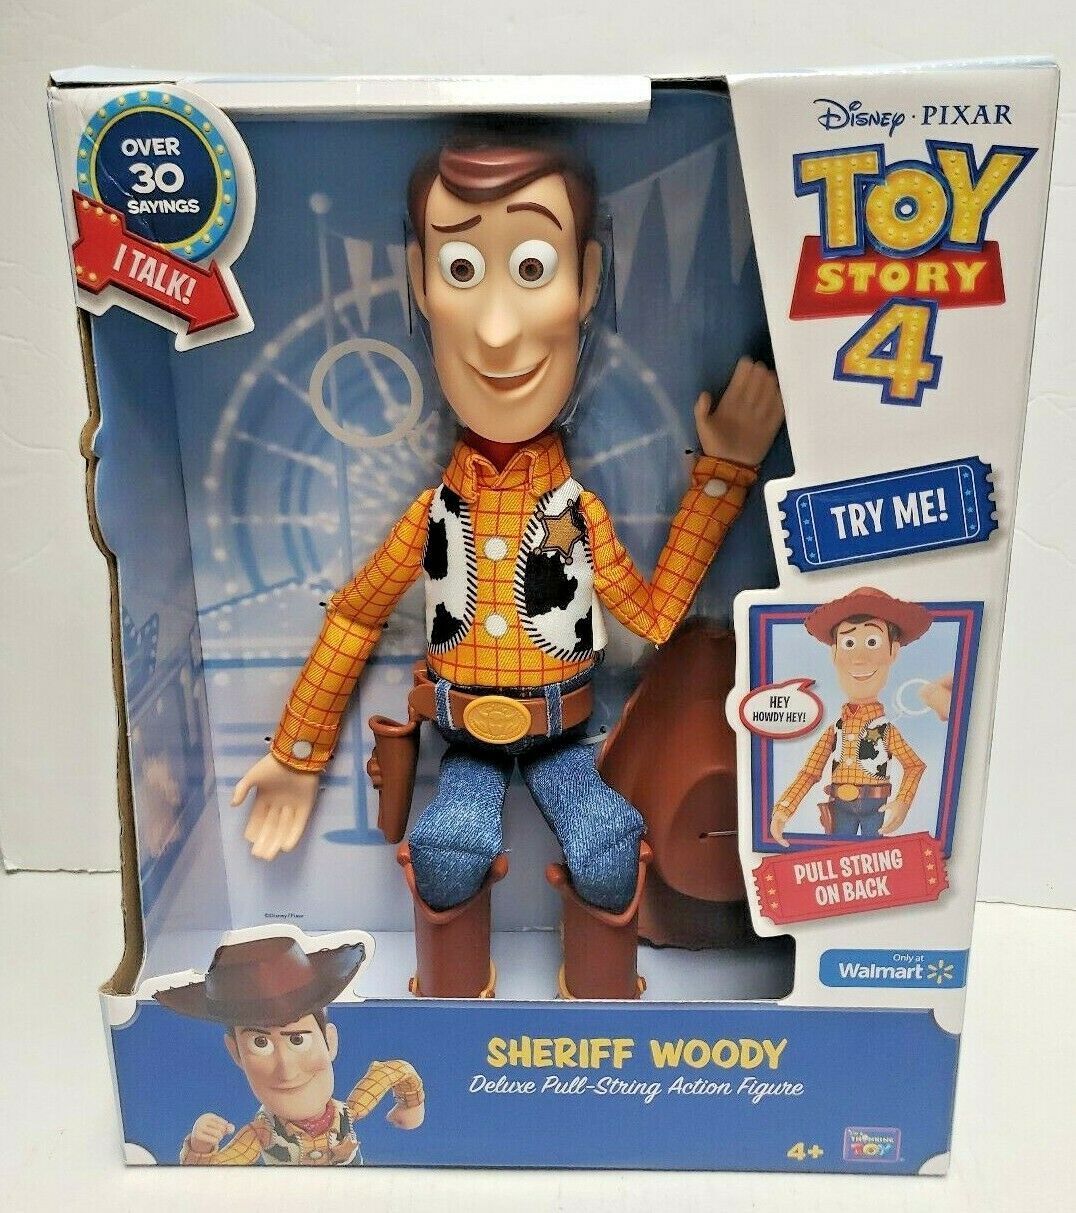 Toy Story 4 Sheriff Woody Deluxe Pull-String Action Figure Disney PIXAR ...